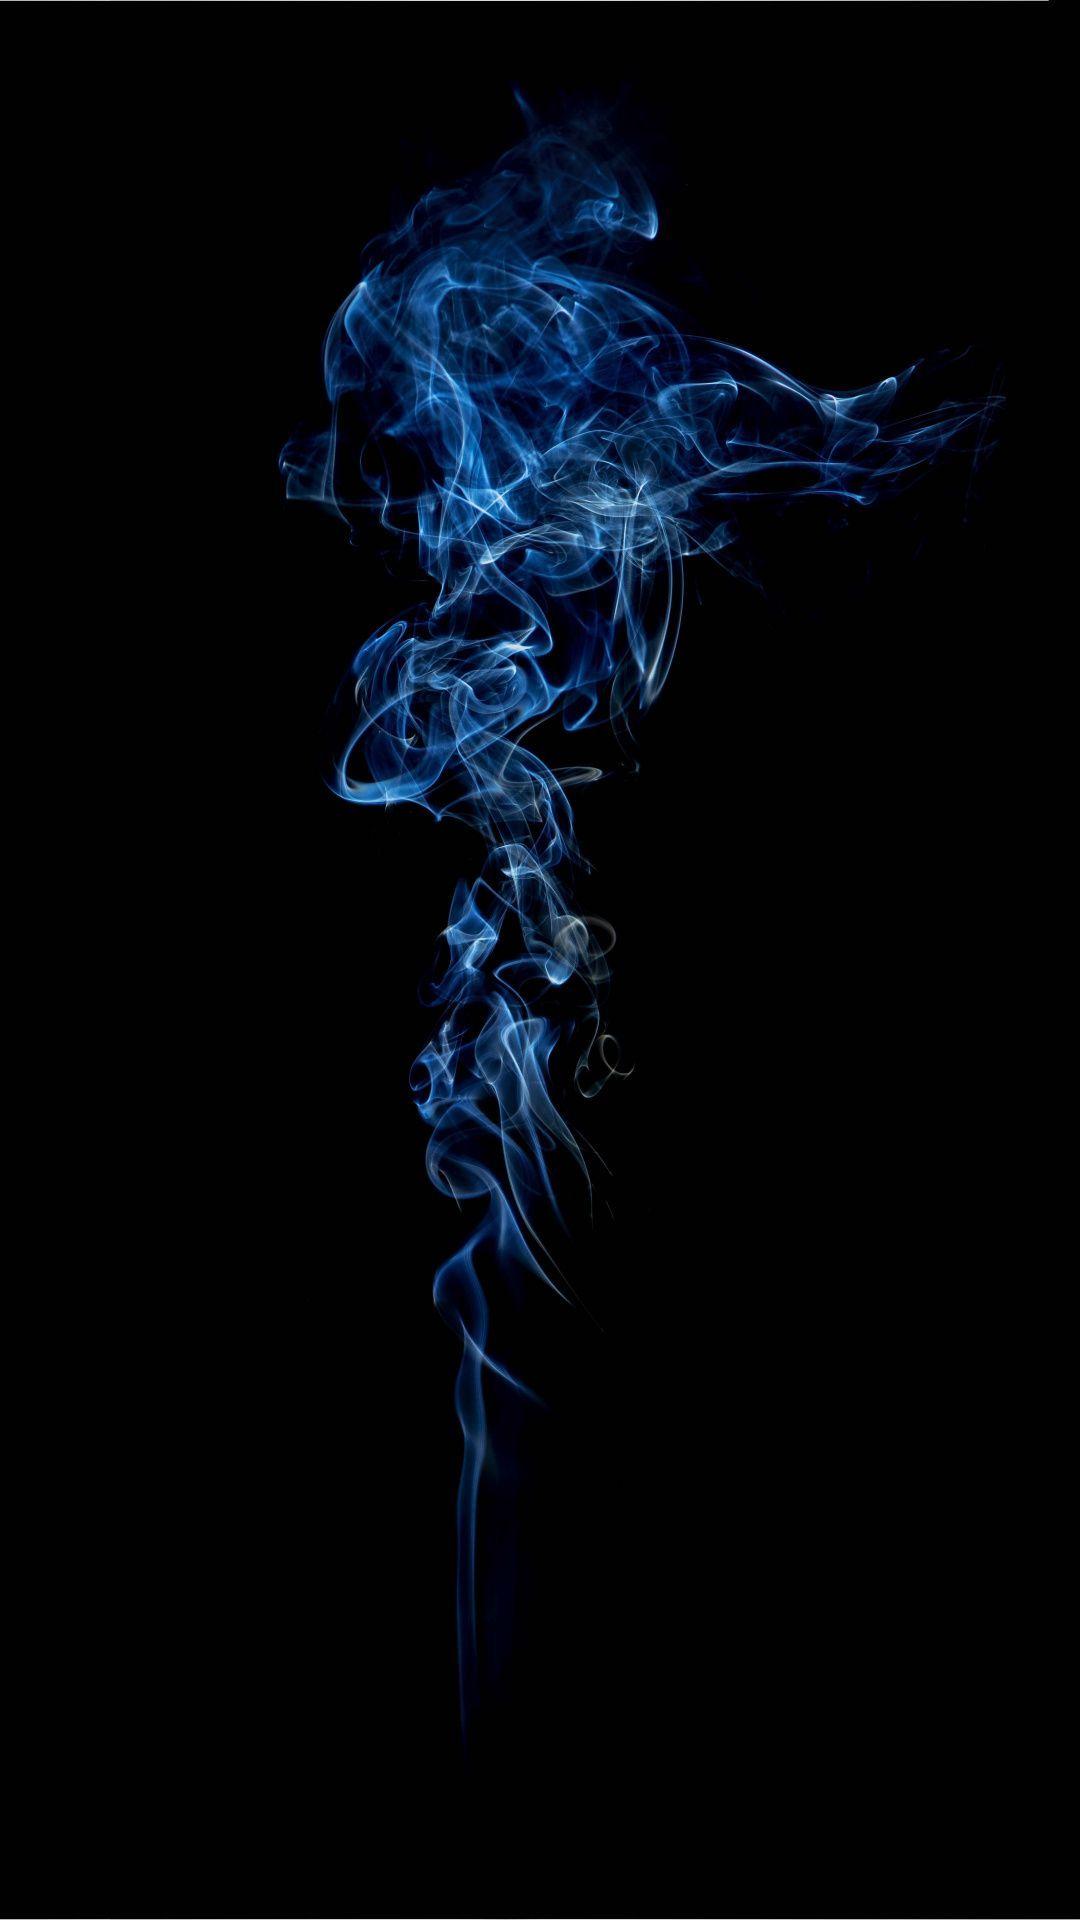 Blue Smoke Wallpaper  iPhone Android  Desktop Backgrounds